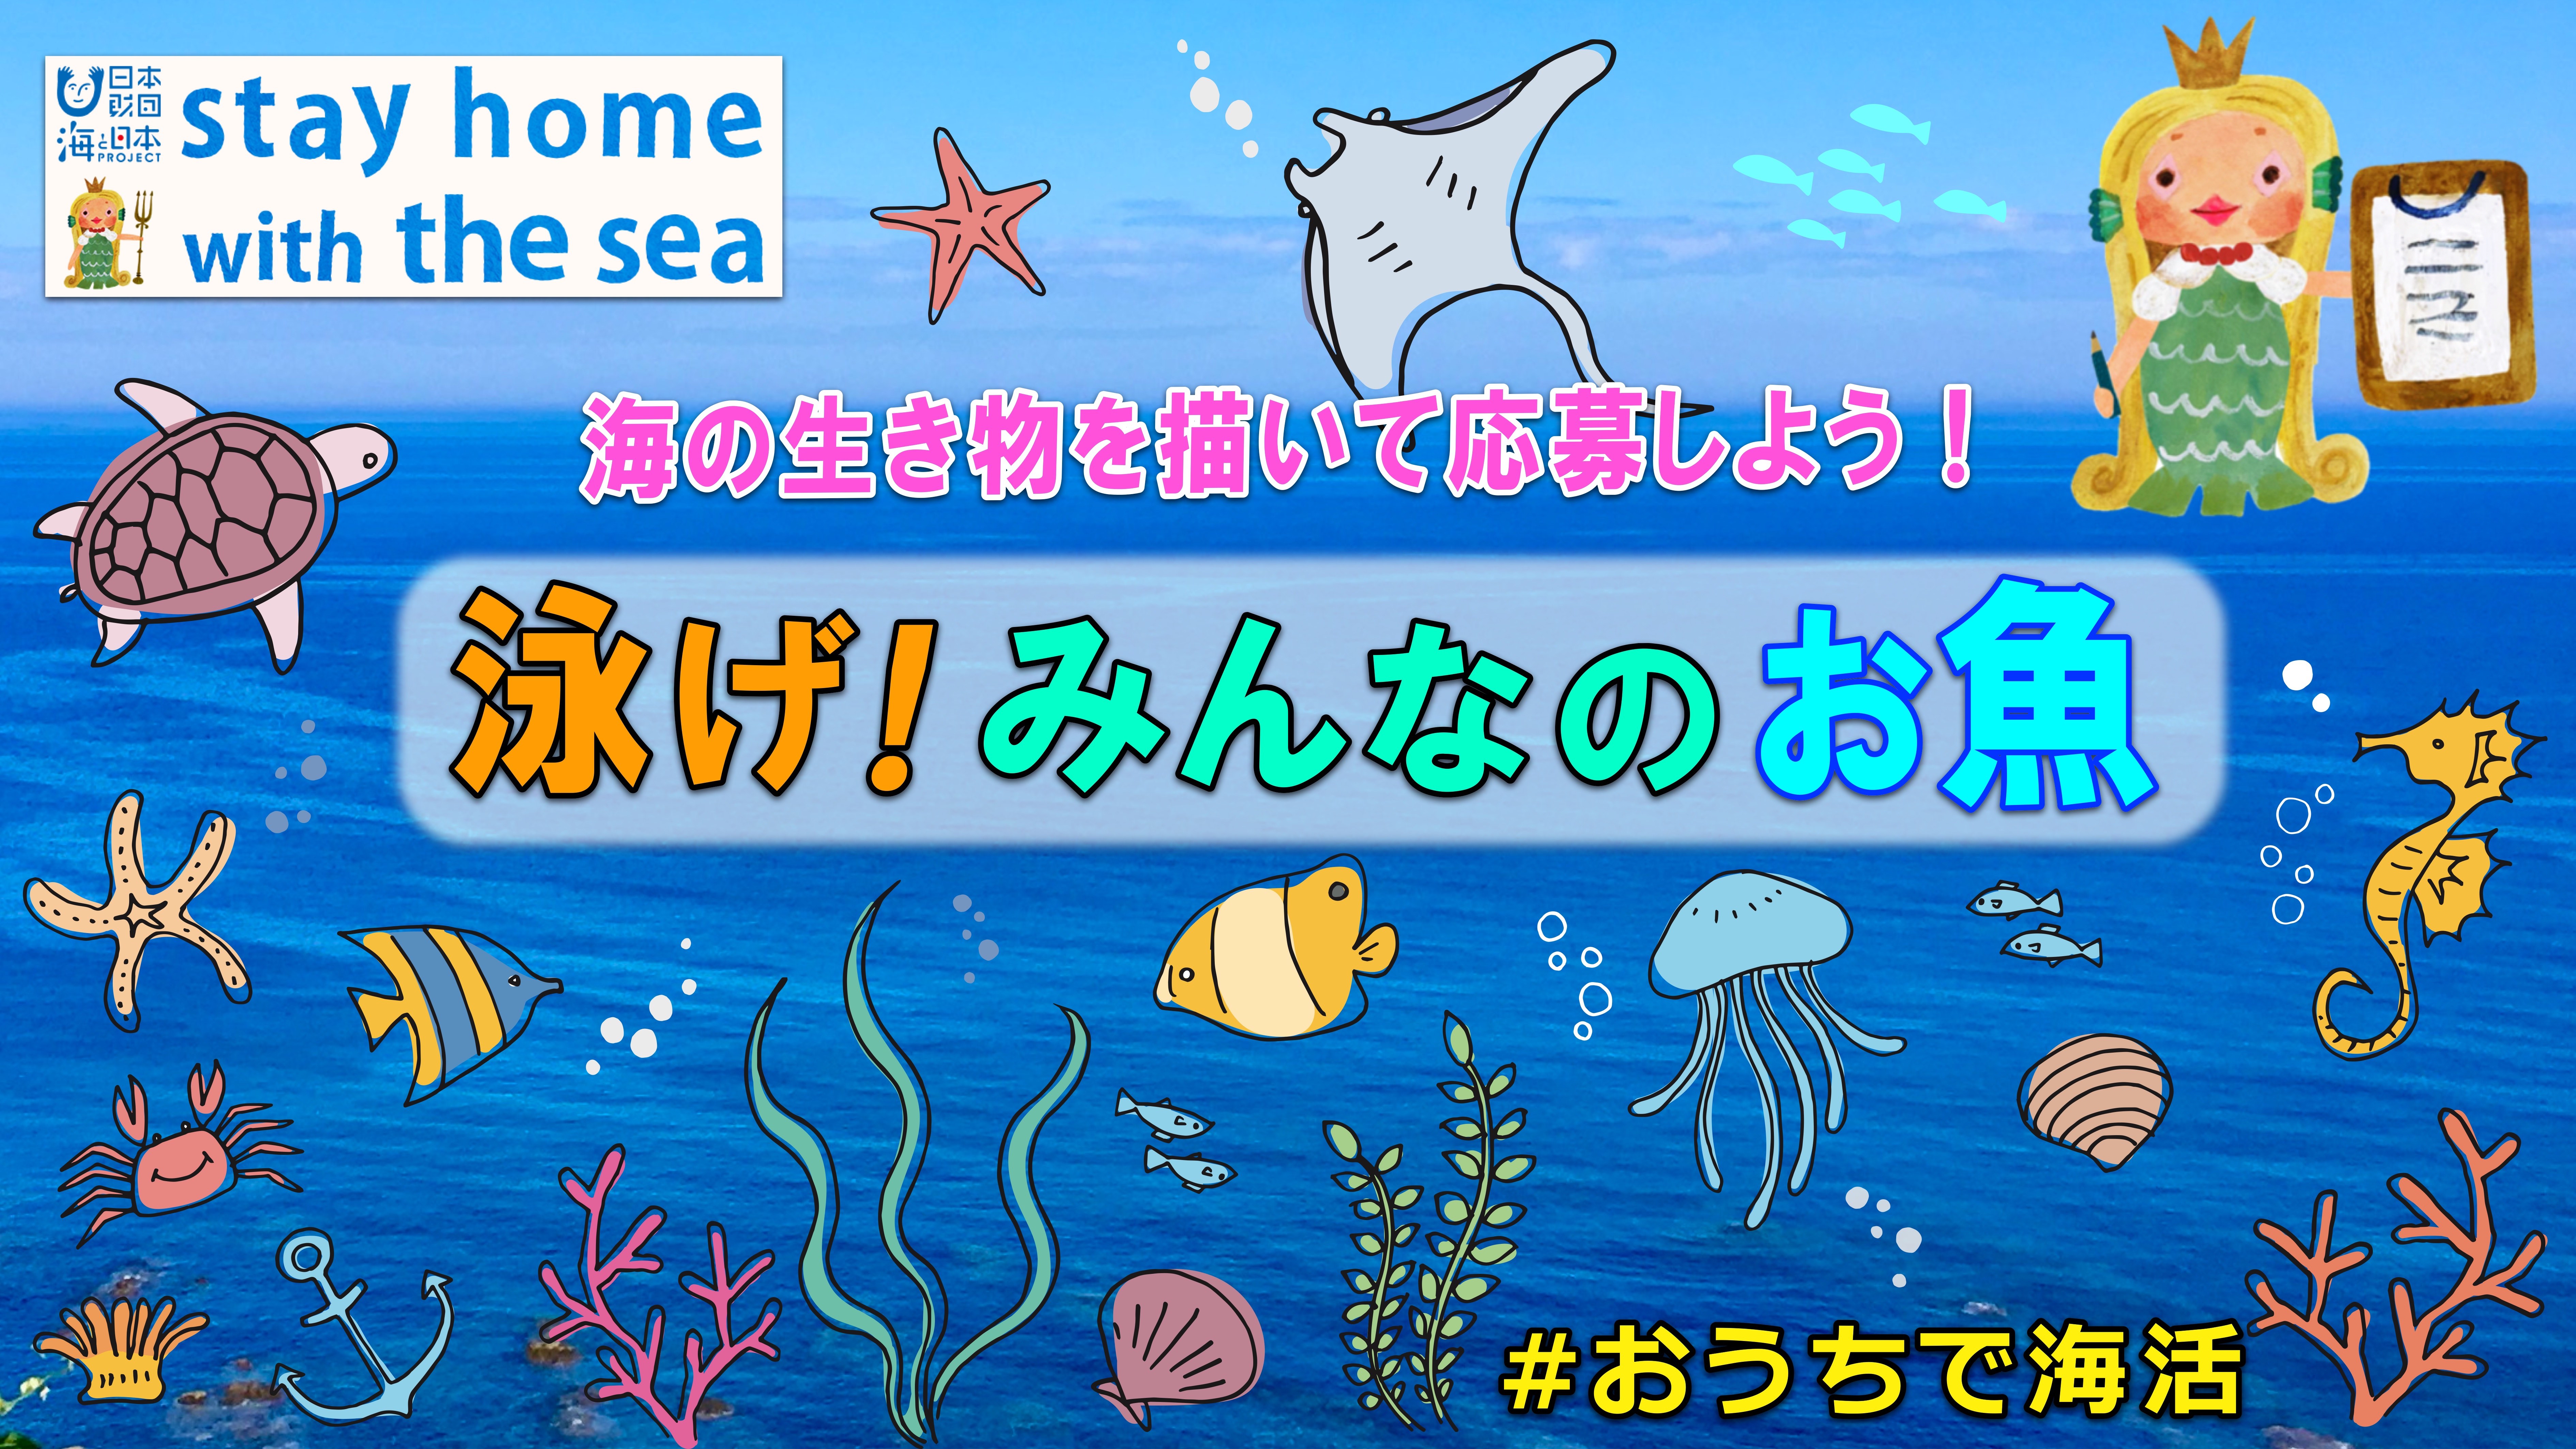 Stay Home With The Sea 海の生き物のイラスト を募集します 海